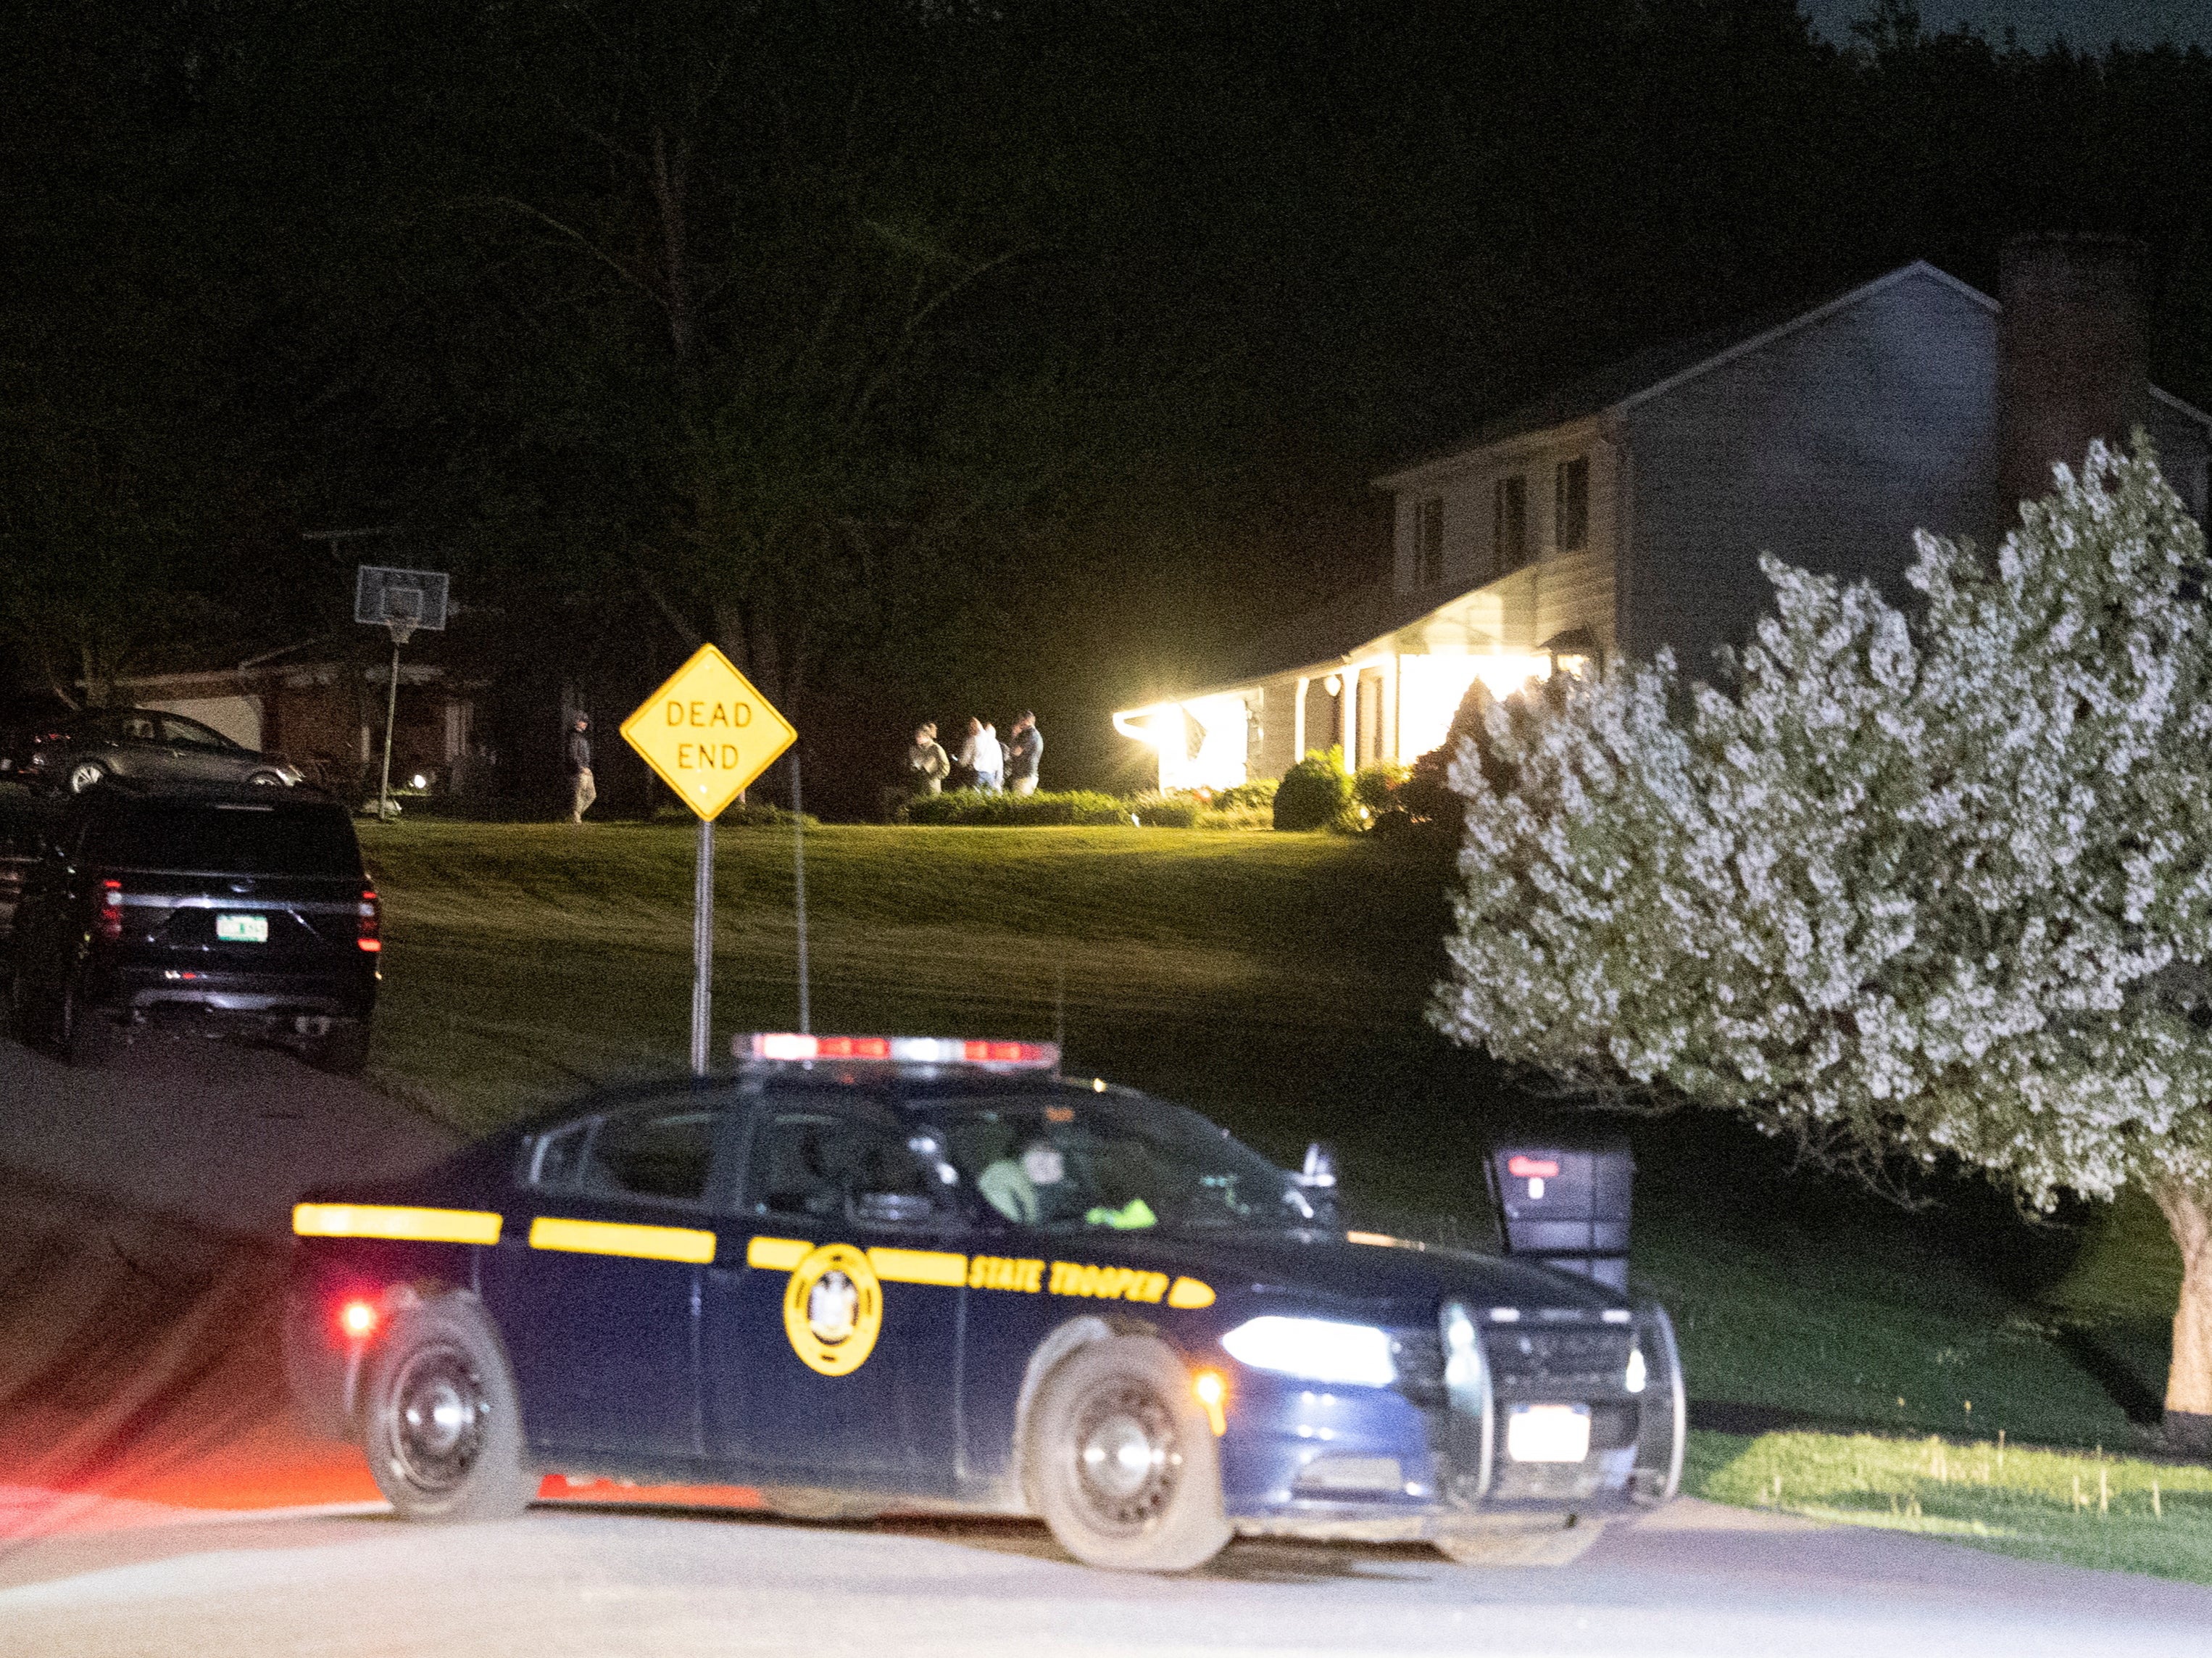 Police outside the home of Payton Gendron in Conklin, New York, on Saturday